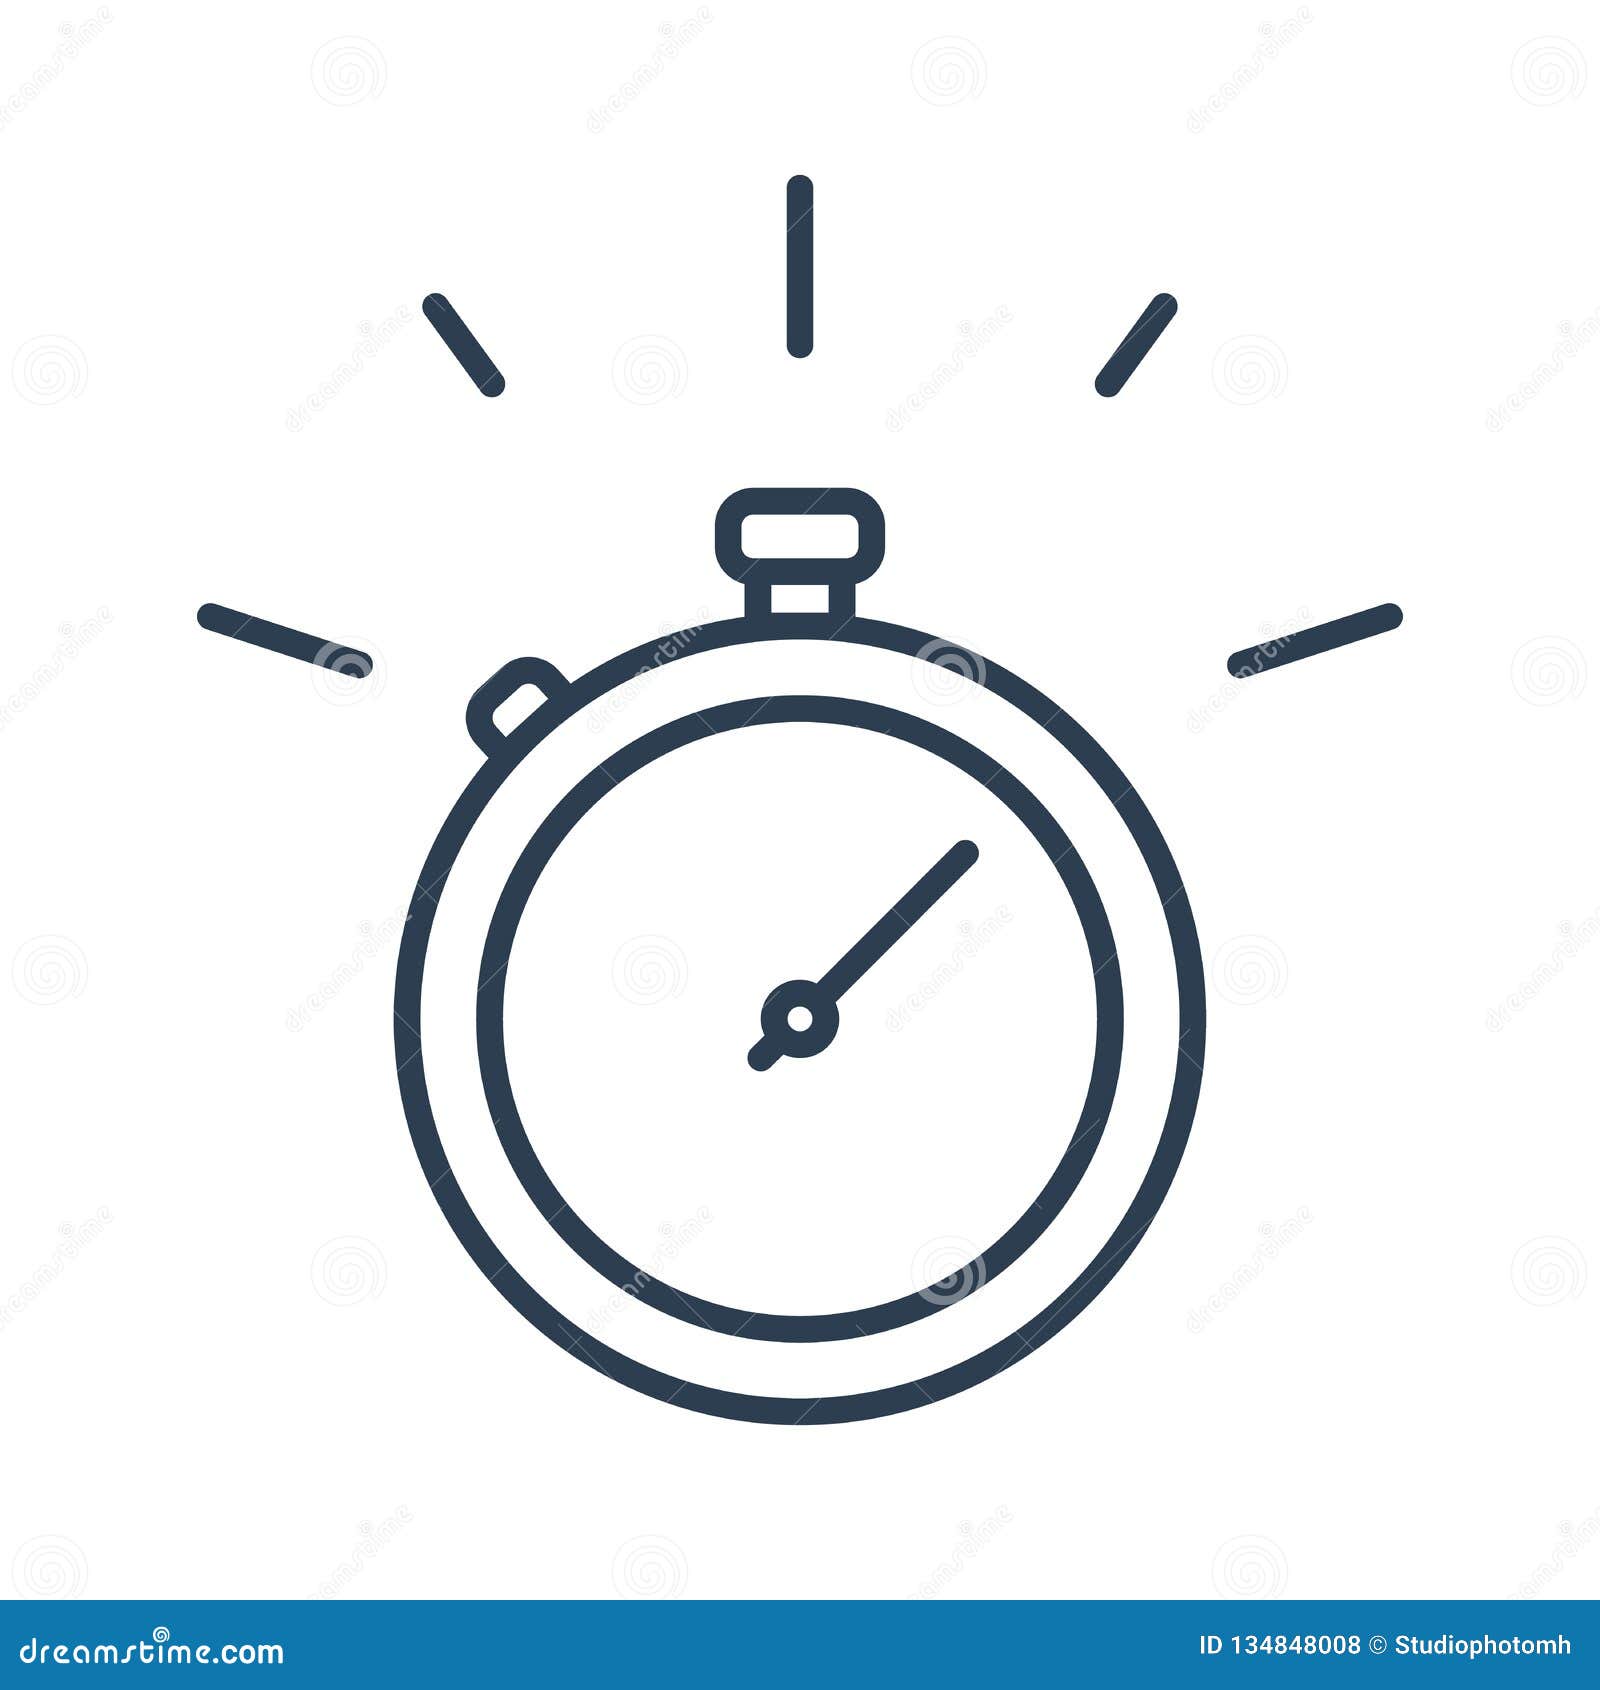 Stop time Vectors & Illustrations for Free Download